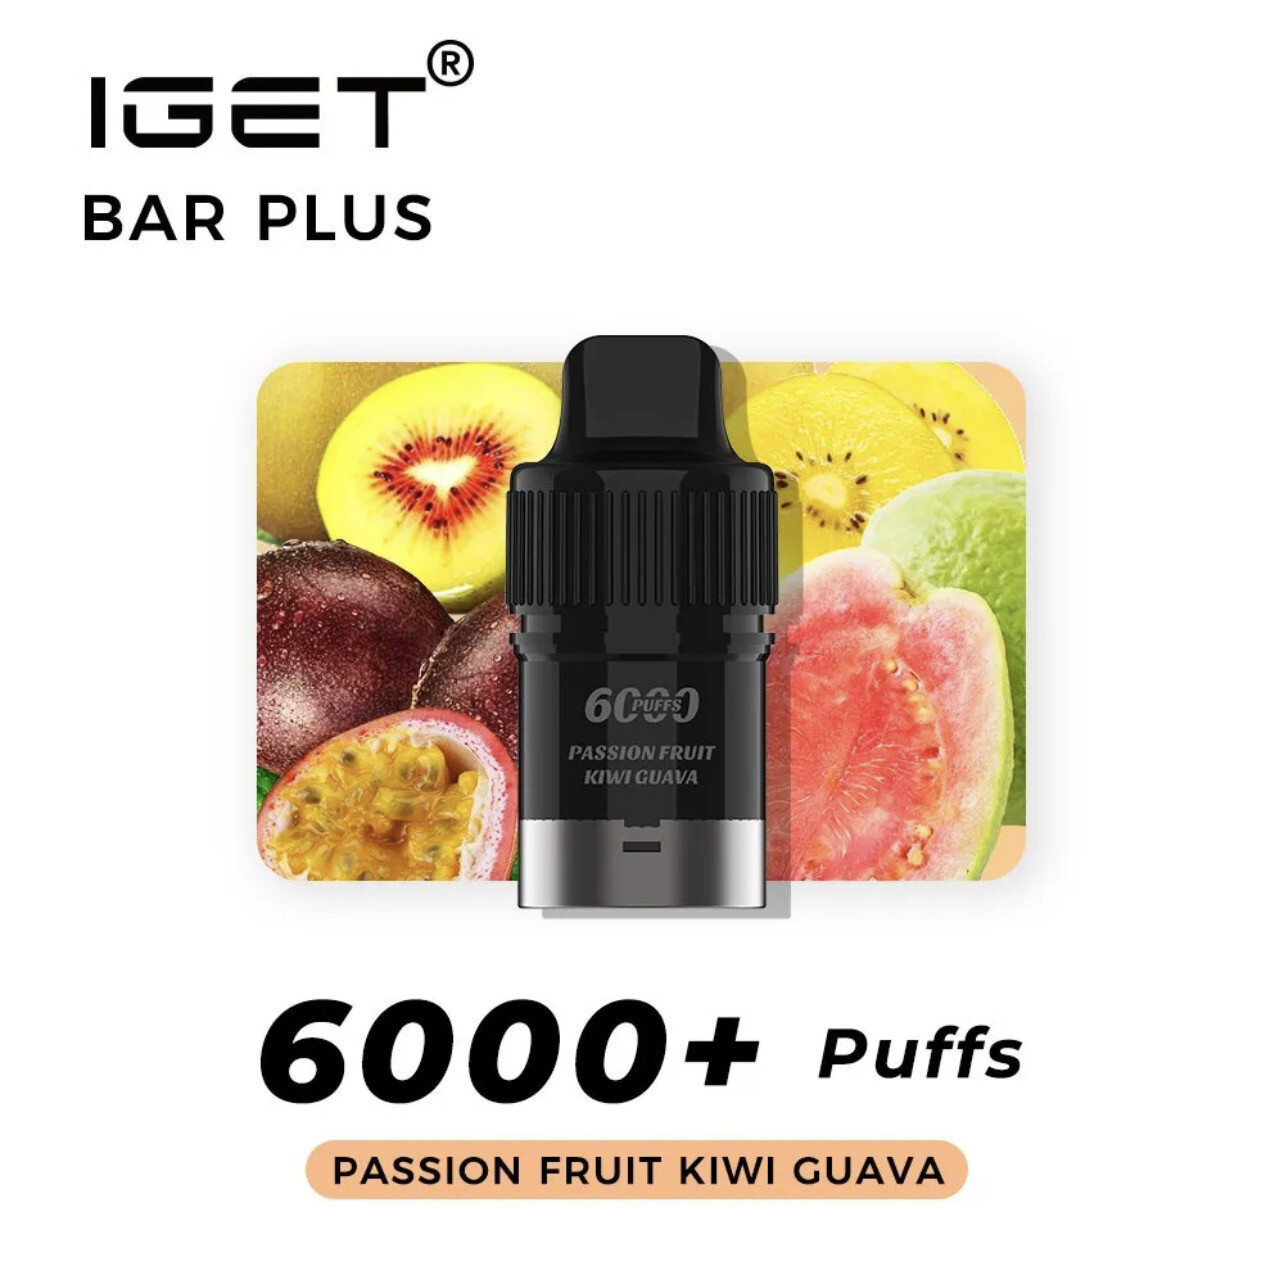 PASSION FRUIT KIWI GUAVA PODS ONLY 6000 PUFFS